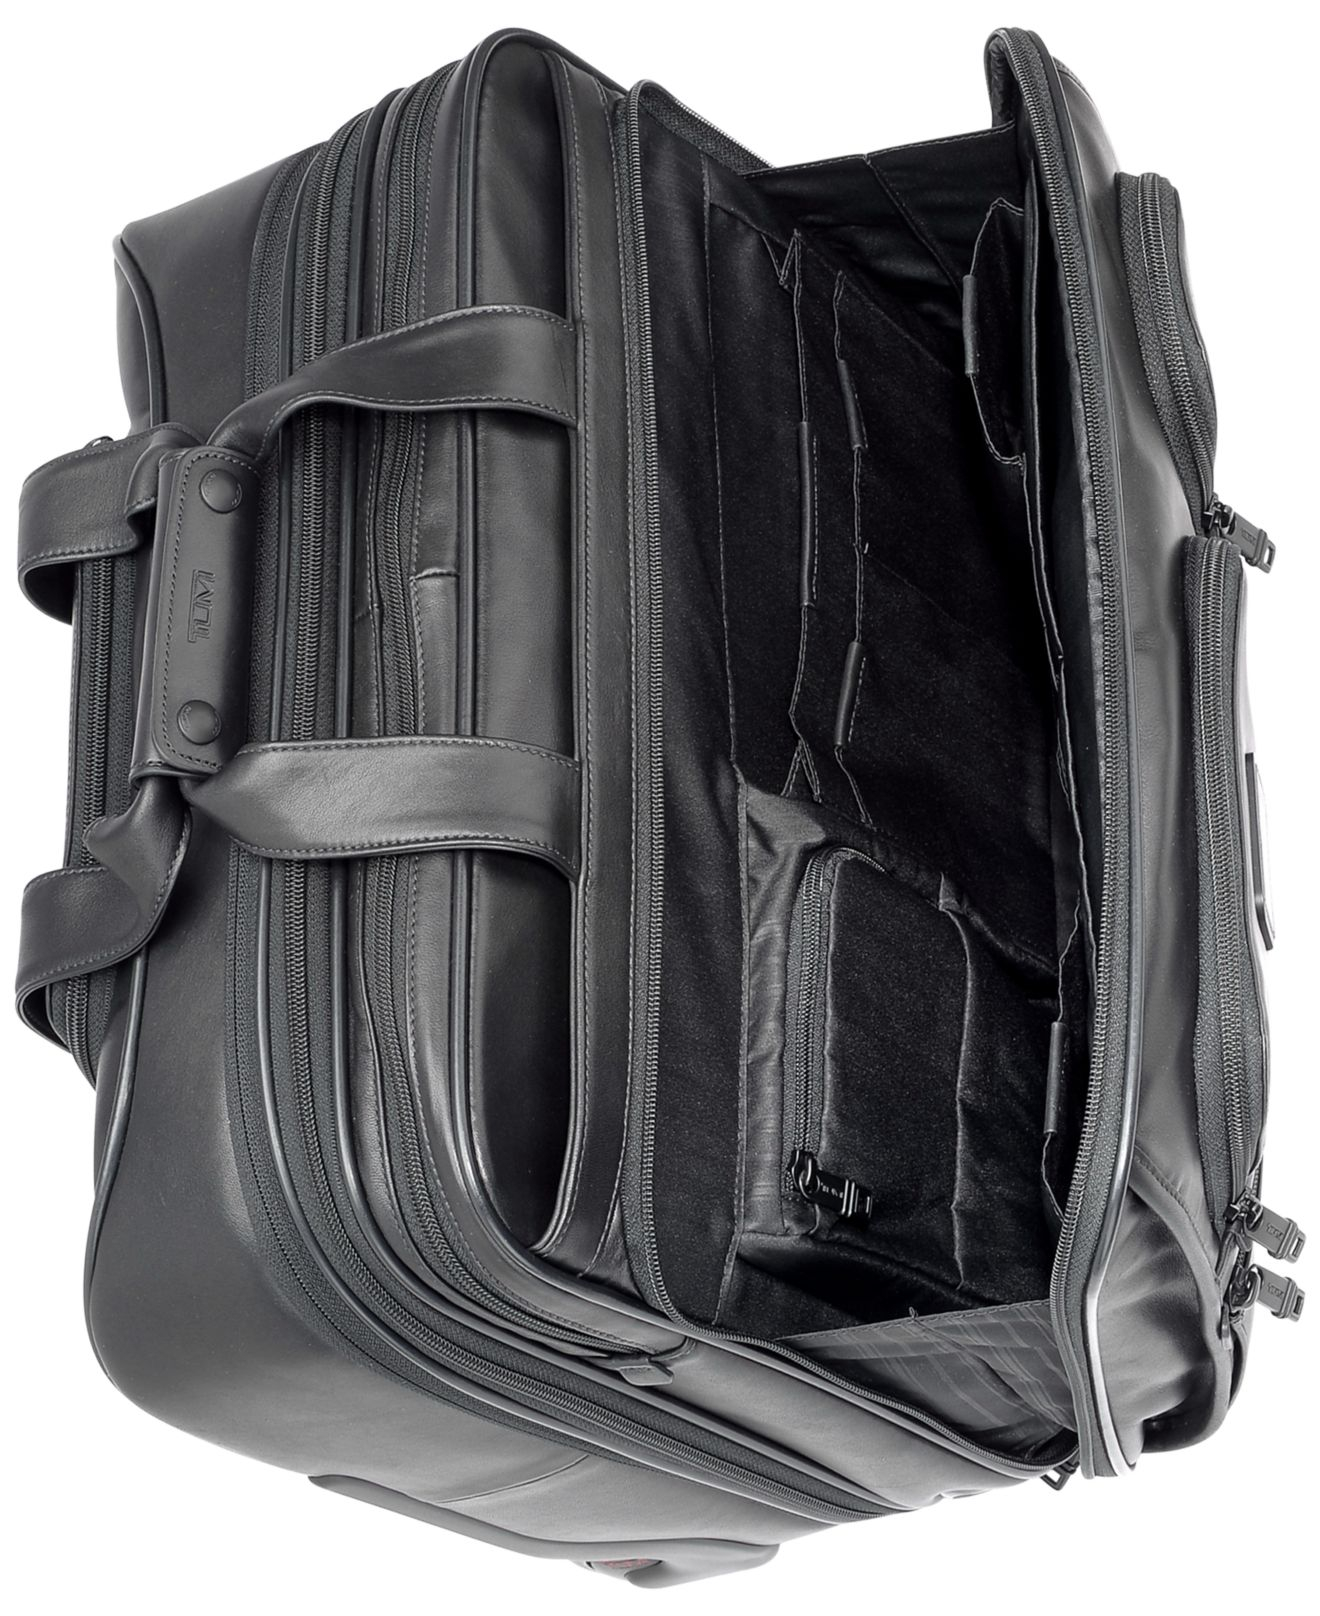 Tumi Alpha 2 Deluxe Leather Rolling Laptop Briefcase in Black for